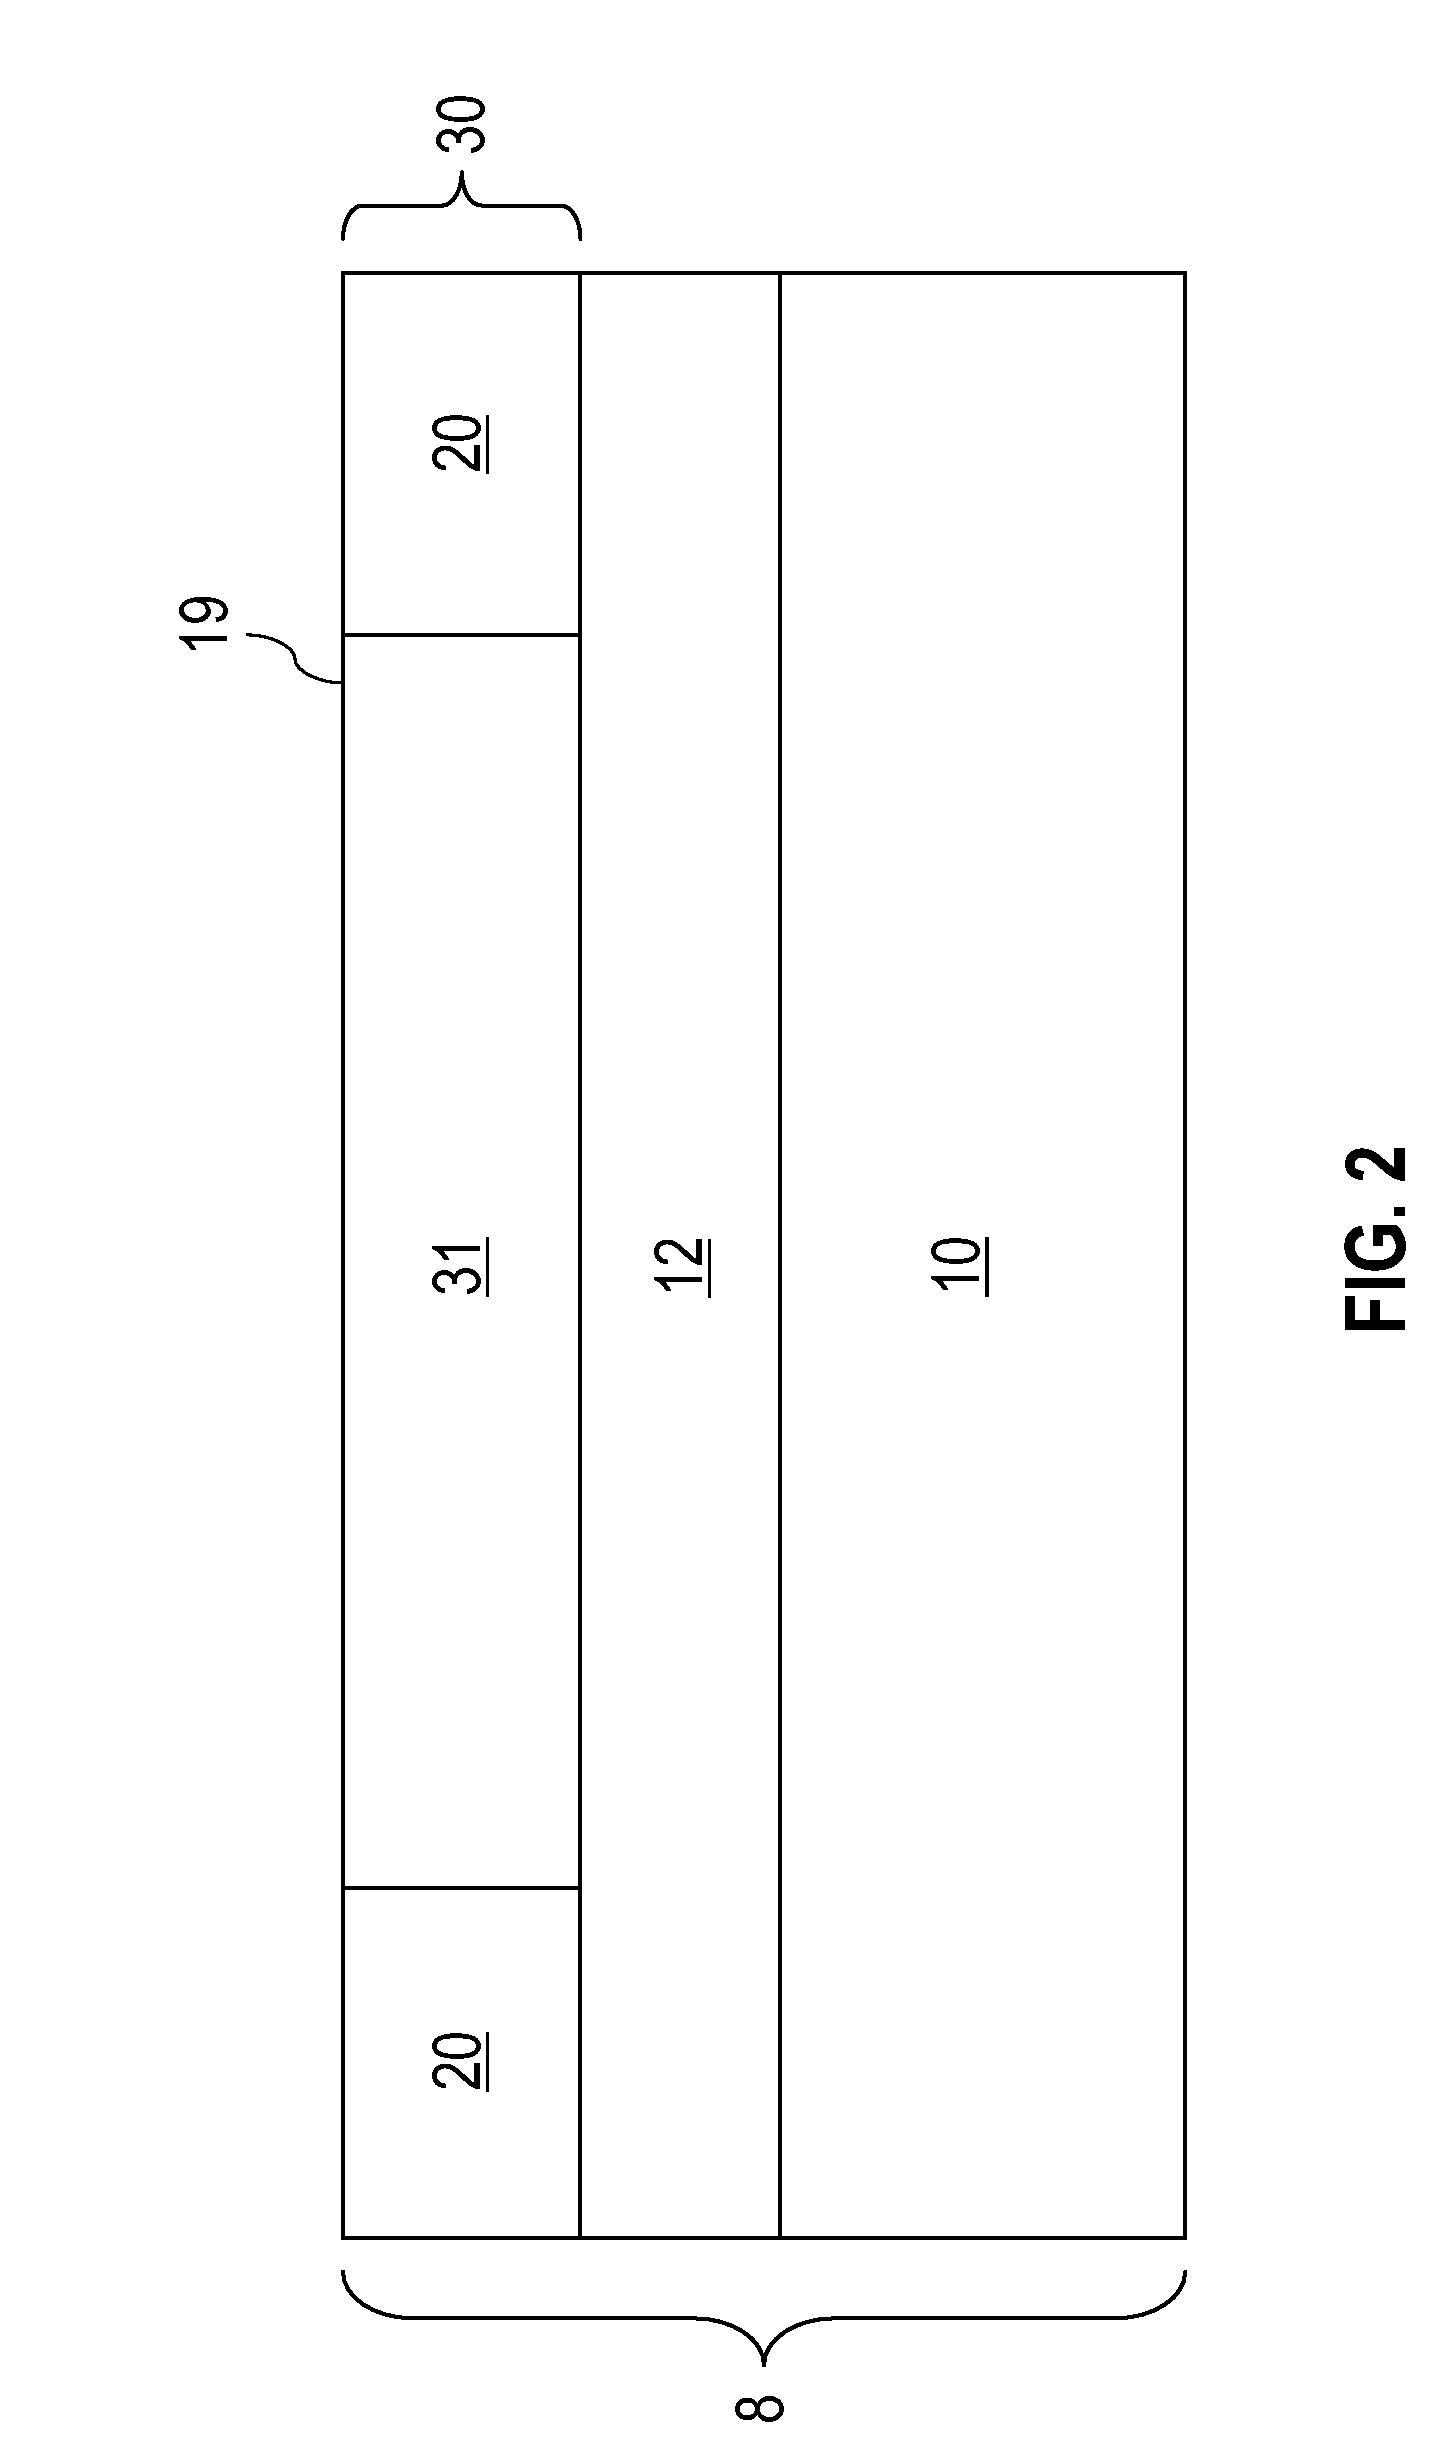 Partially depleted soi field effect transistor having a metallized source side halo region